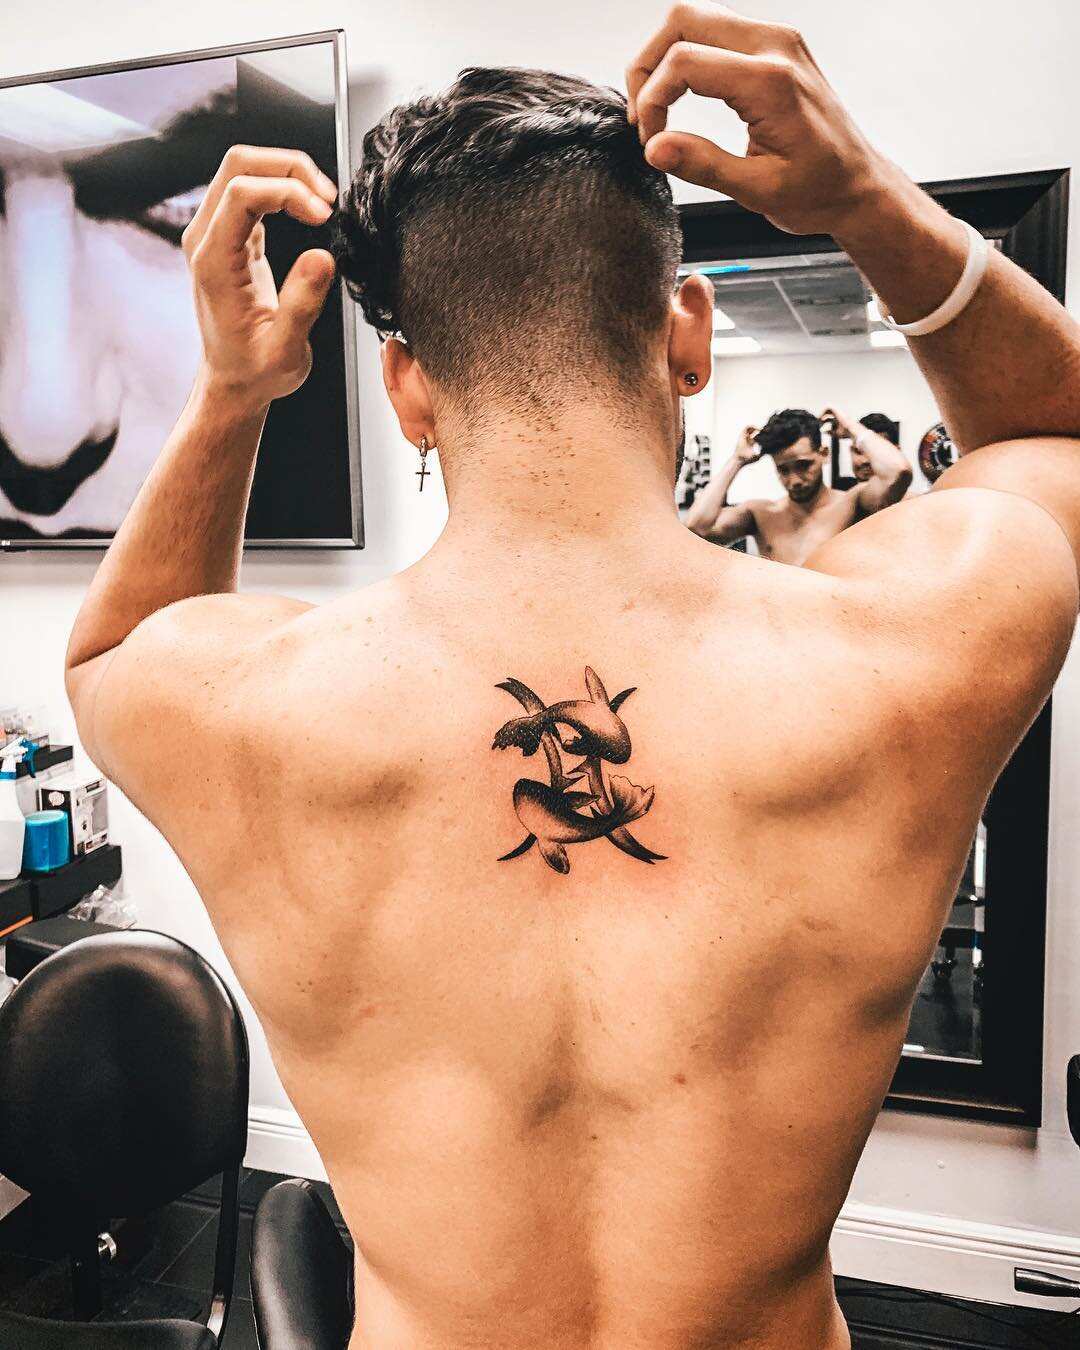 45 Pisces Tattoos For Men and Women to Celebrate Pisces Season